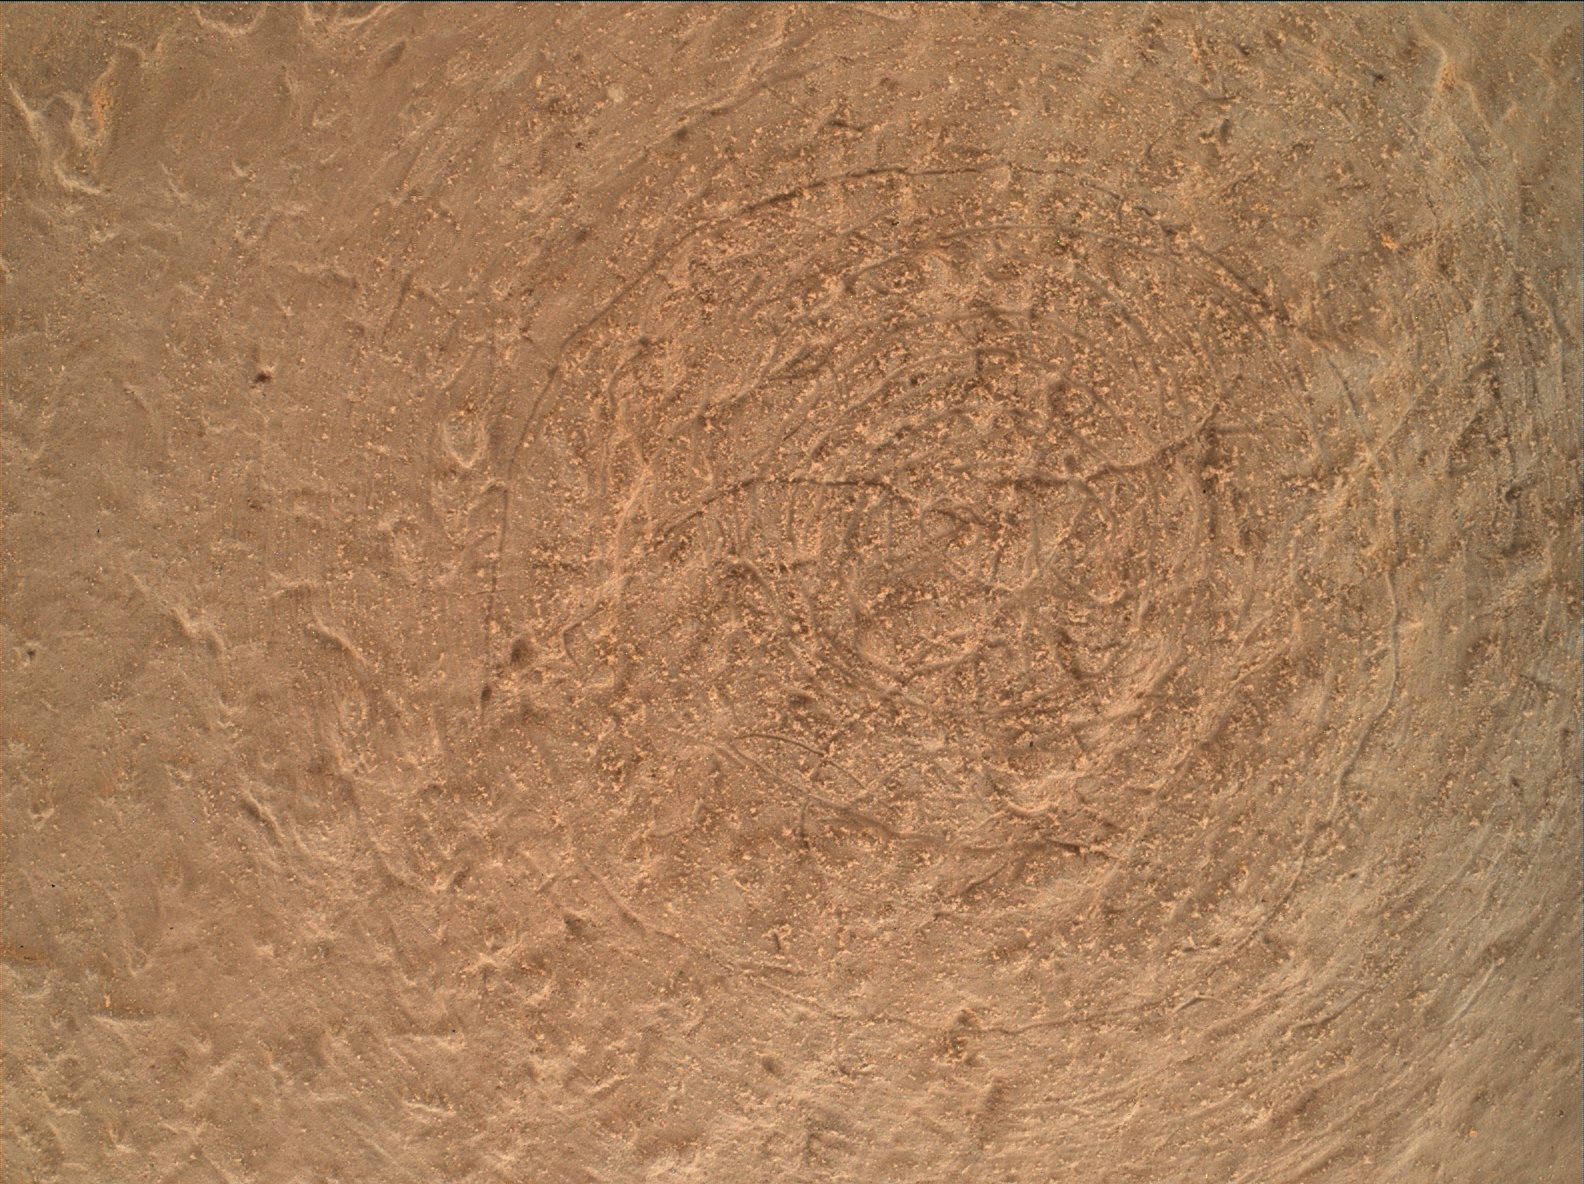 Nasa's Mars rover Curiosity acquired this image using its Mars Hand Lens Imager (MAHLI) on Sol 755